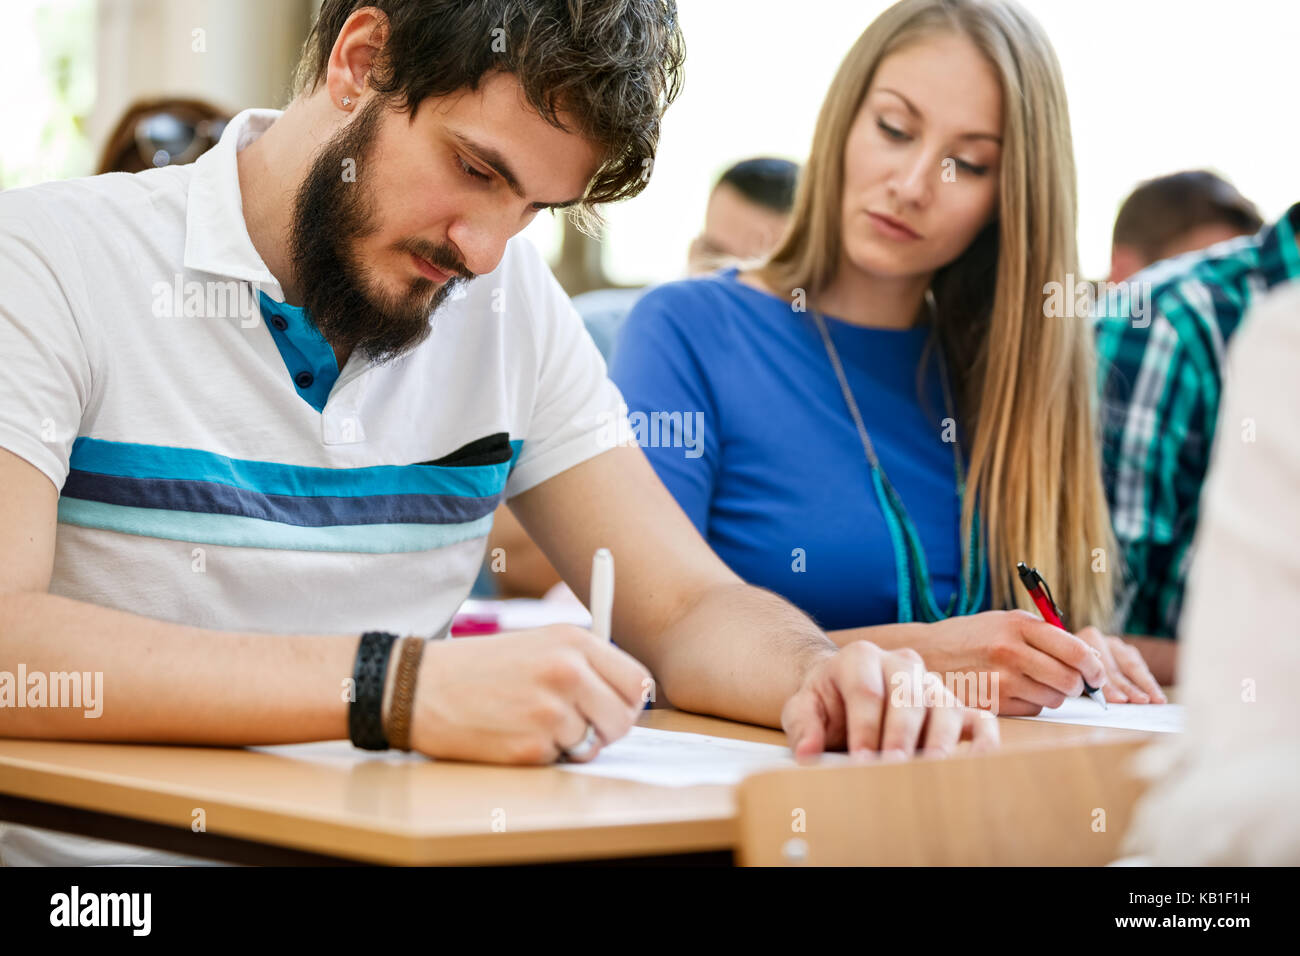 Female student looking at colleague test Stock Photo